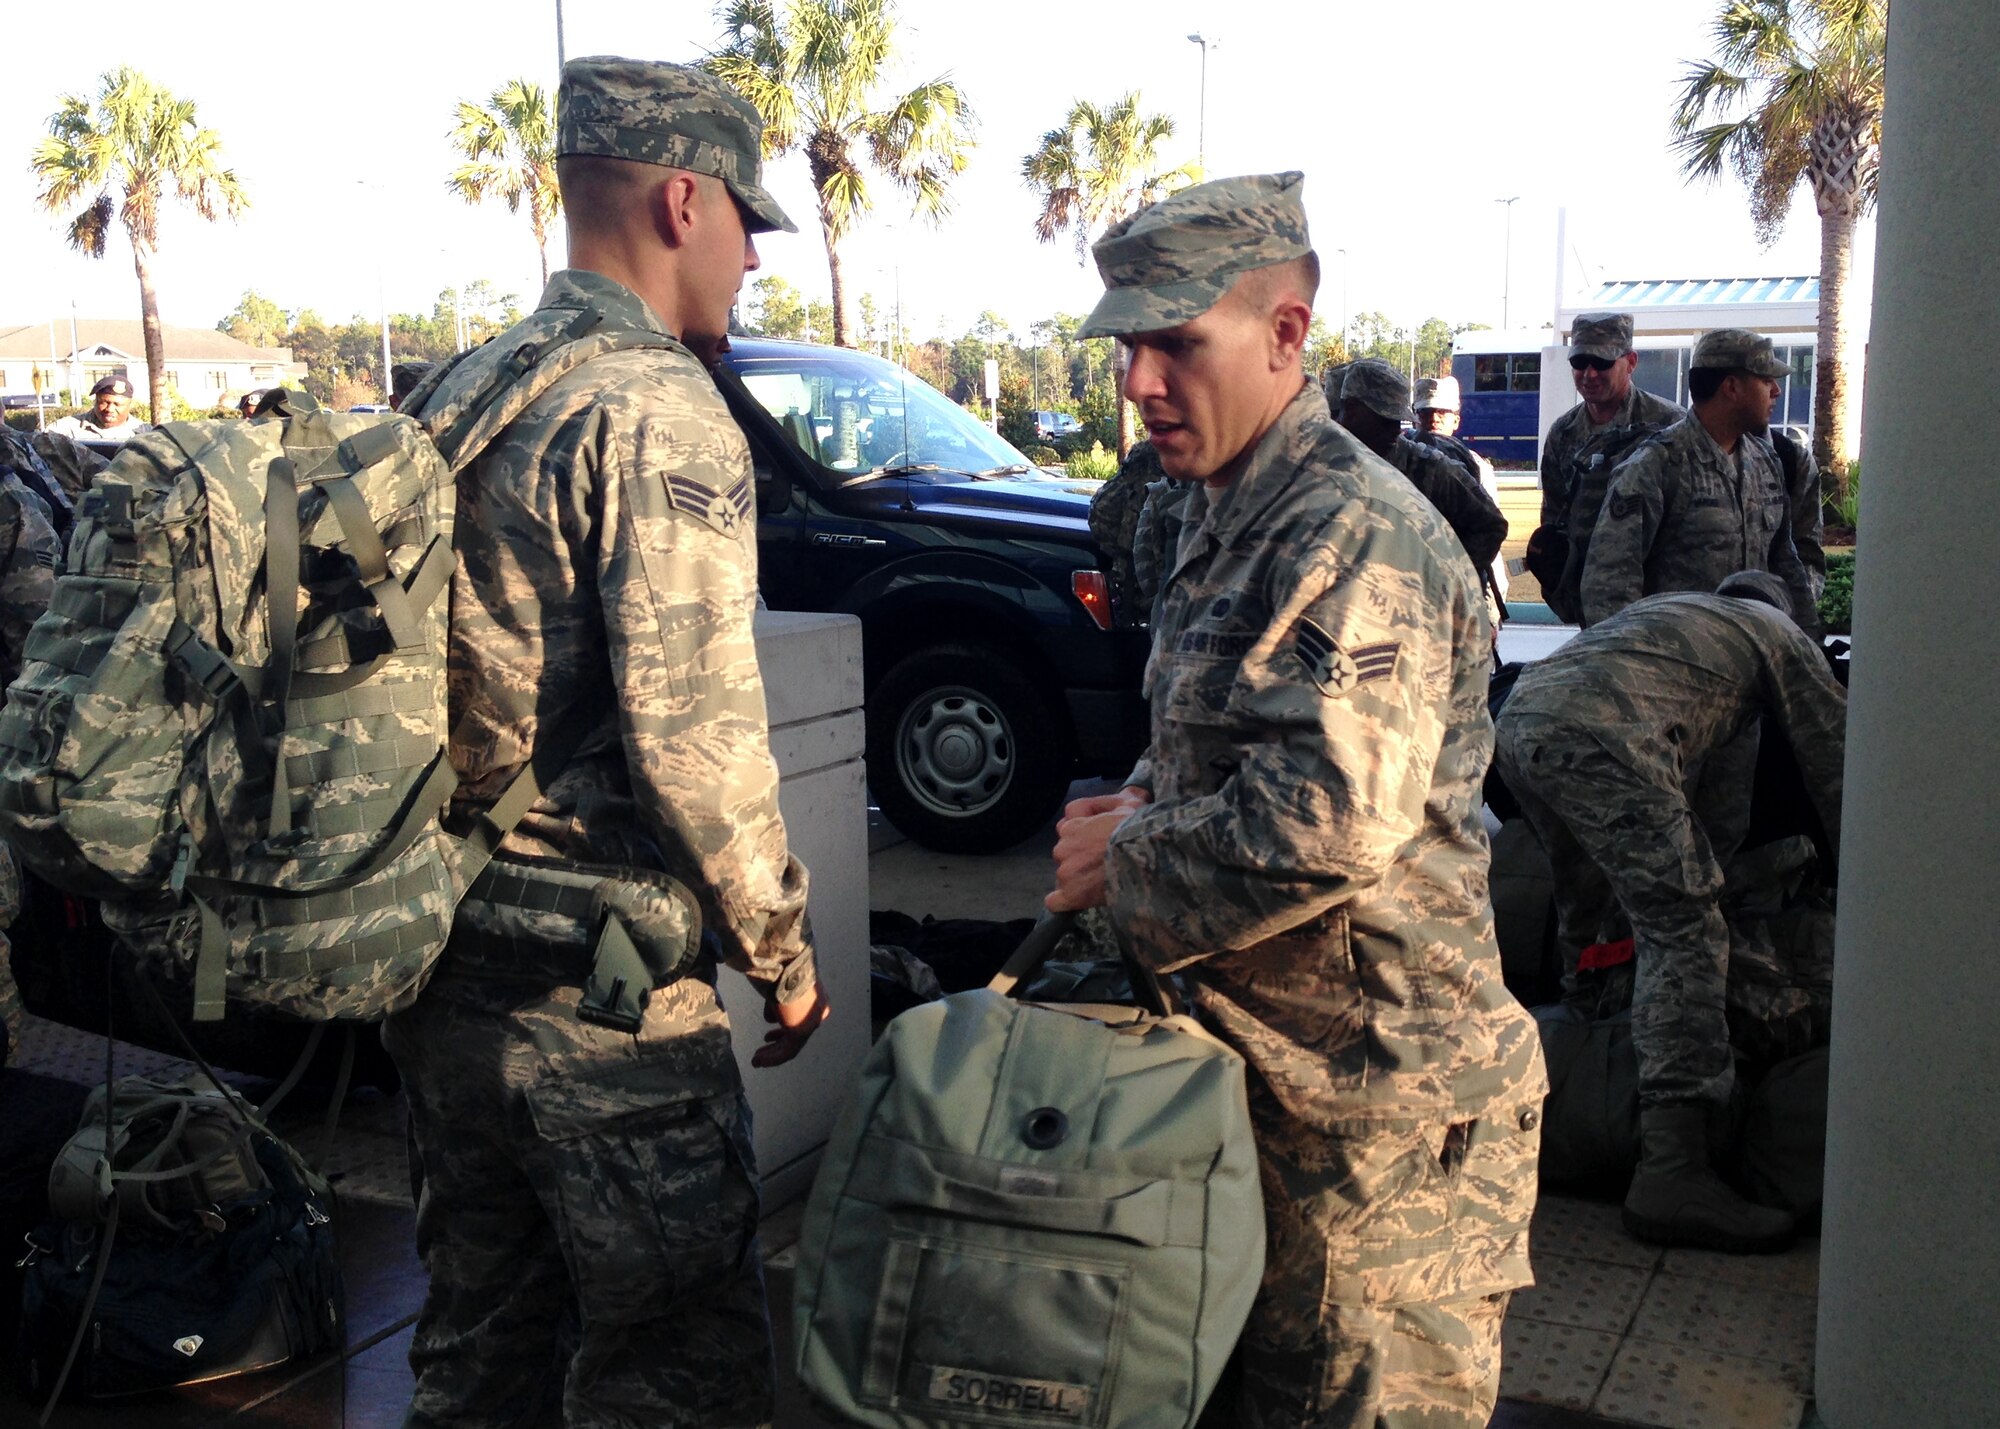 Senior Airman Benton Sorrell, right, and Senior Airman Sebastian Green, with the 403rd Security Forces Squadron at Keesler Air Force Base, Mississippi, depart for pre-deployment training at Creech Air Force Base, Nevada, Dec. 5, 2014.  About 30 Airmen with the 403rd SFS are attending the Base Security Operations Course prior to their deployment to Southwest Asia next month. (U.S. Air Force photo/Maj. Marnee A.C. Losurdo)